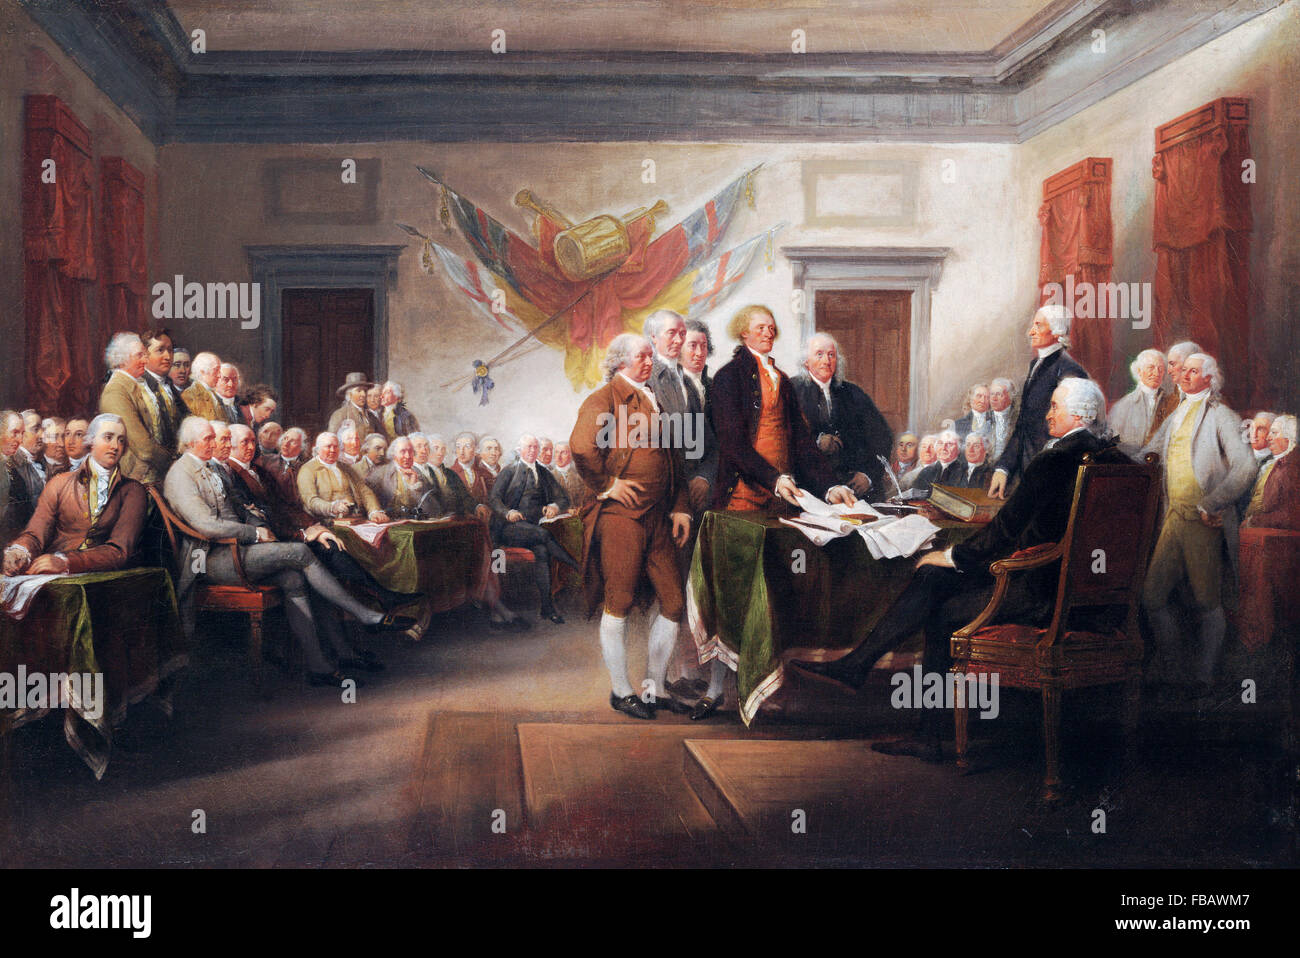 Declaration of Independence. The signing of the United States Declaration of Independence in 1776 - a painting by John Trumbull Stock Photo